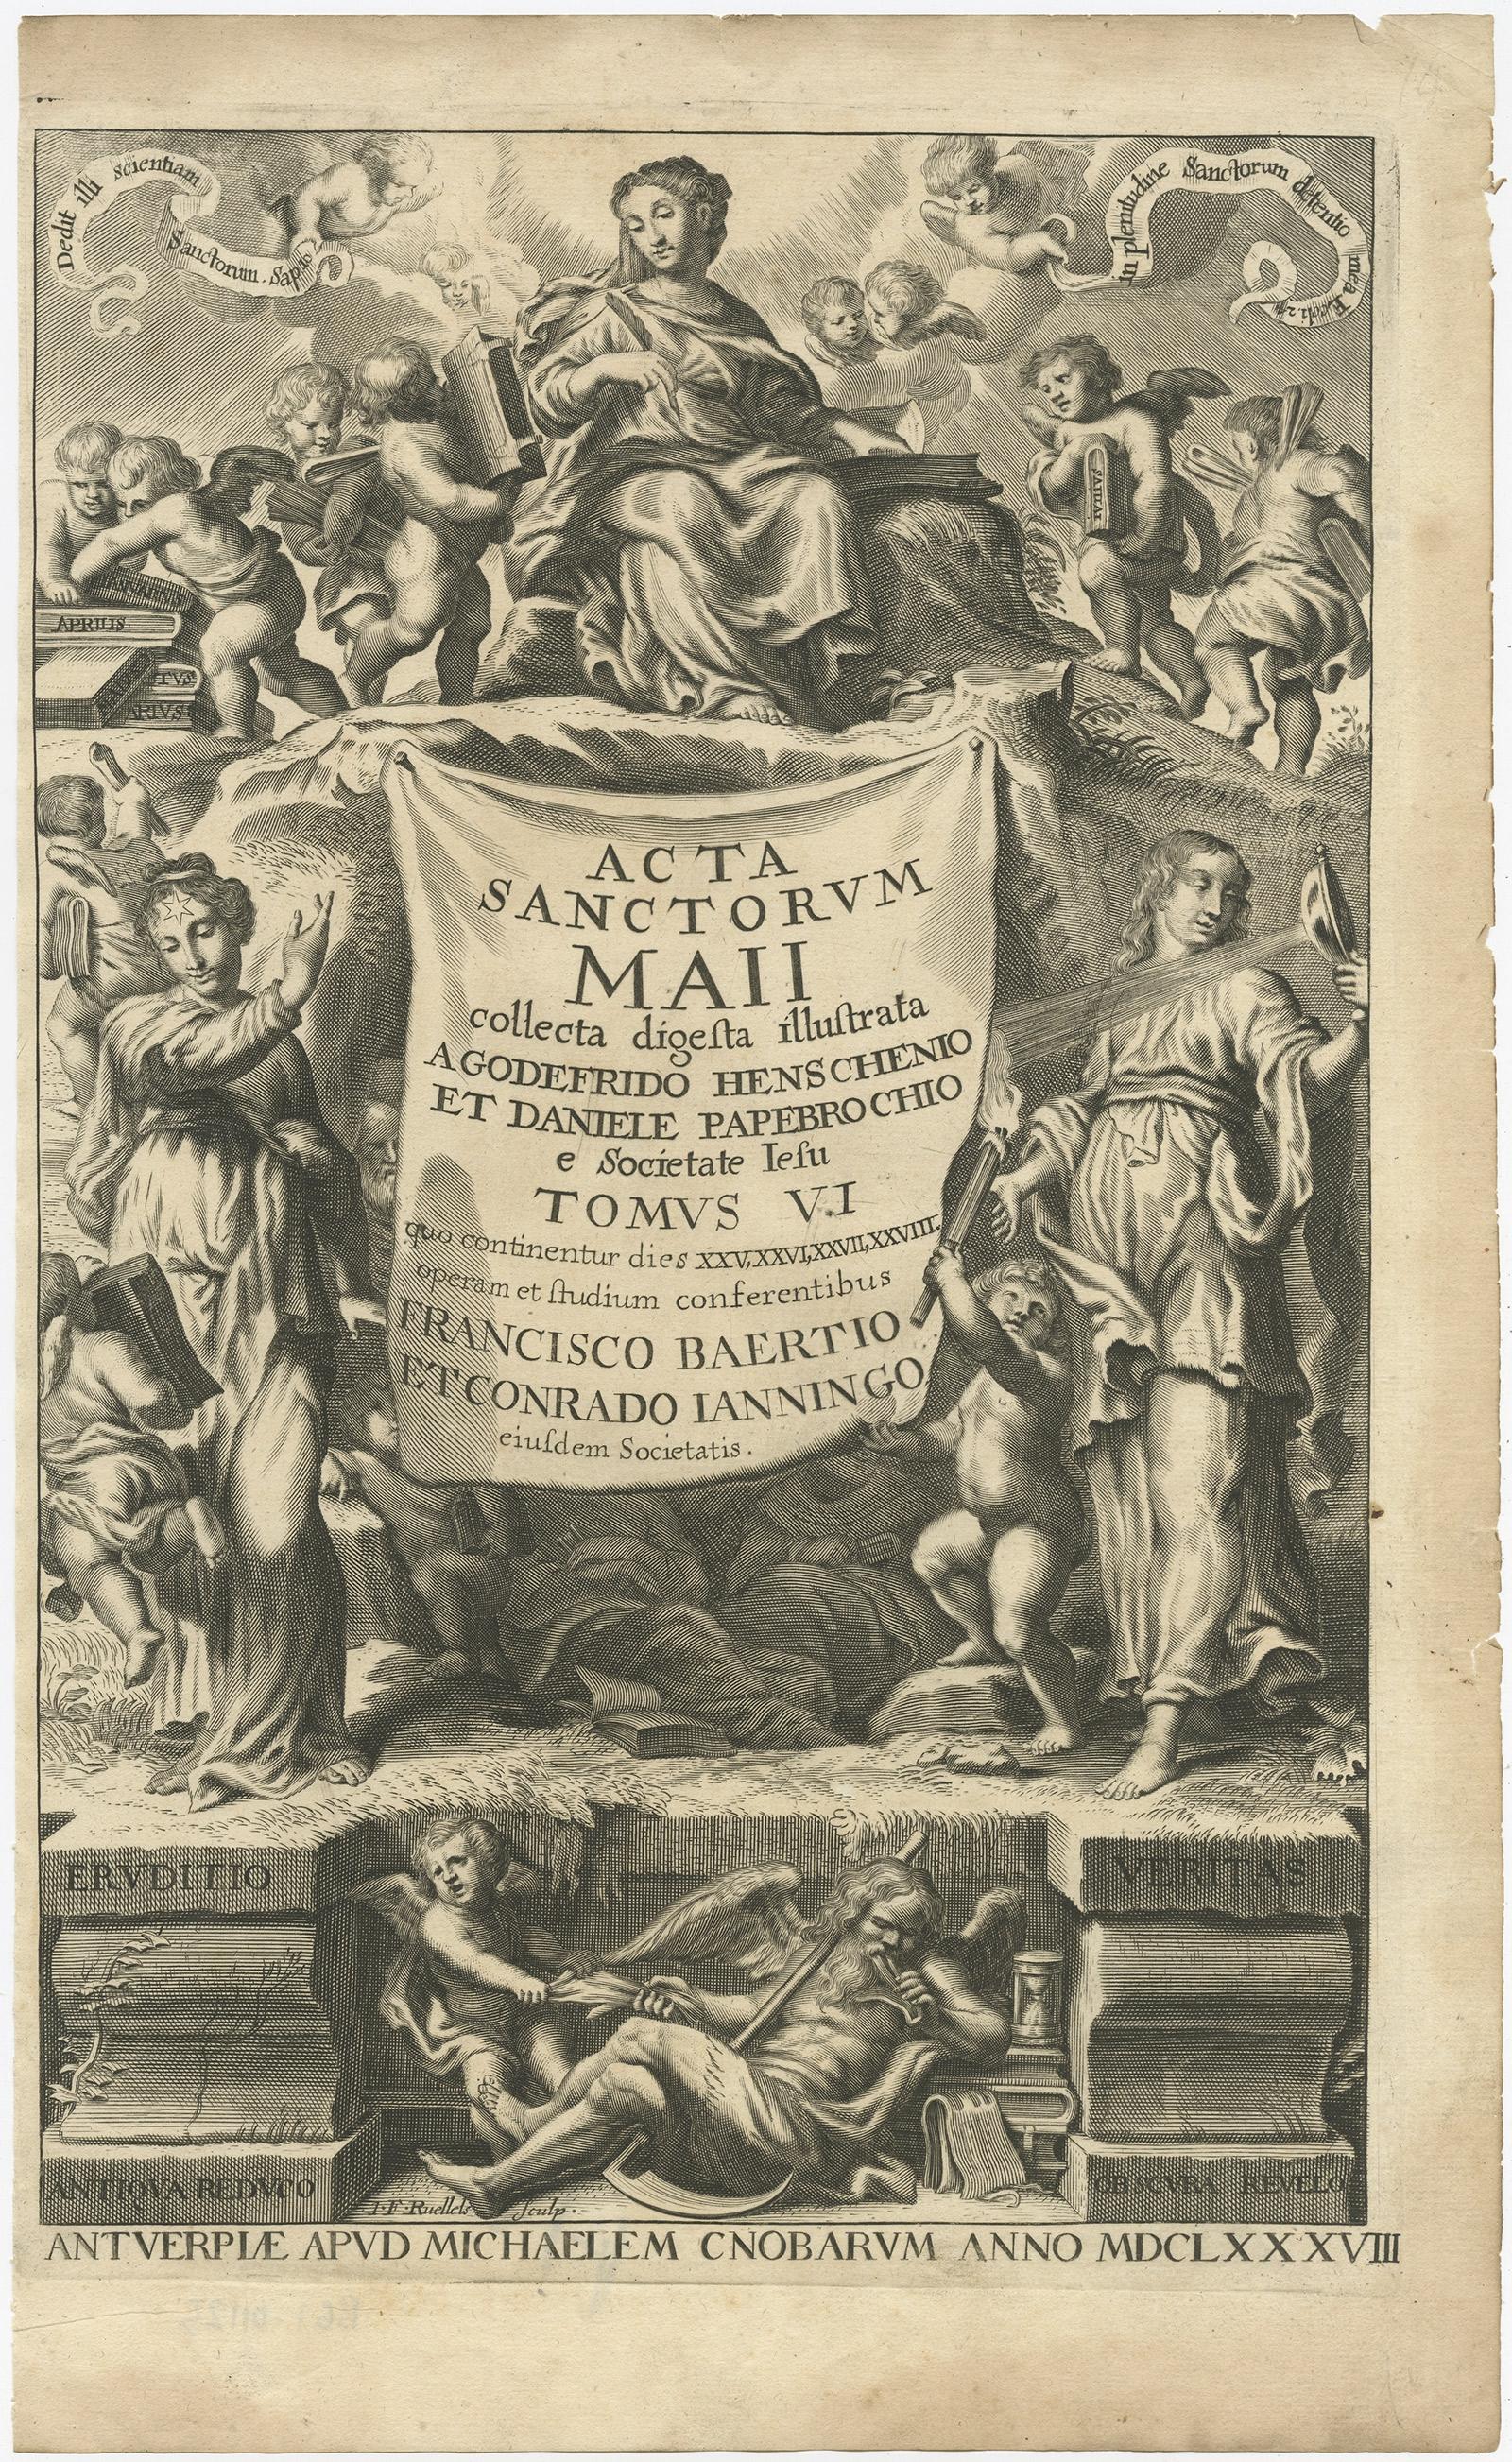 Antique frontispiece titled 'Acta Sactorum Maii, Tomus VI'. This engraving depicts various religious figures. Originates from 'Acta Sanctorum', an encyclopedic text in 68 folio volumes of documents examining the lives of Christian saints.

Artists